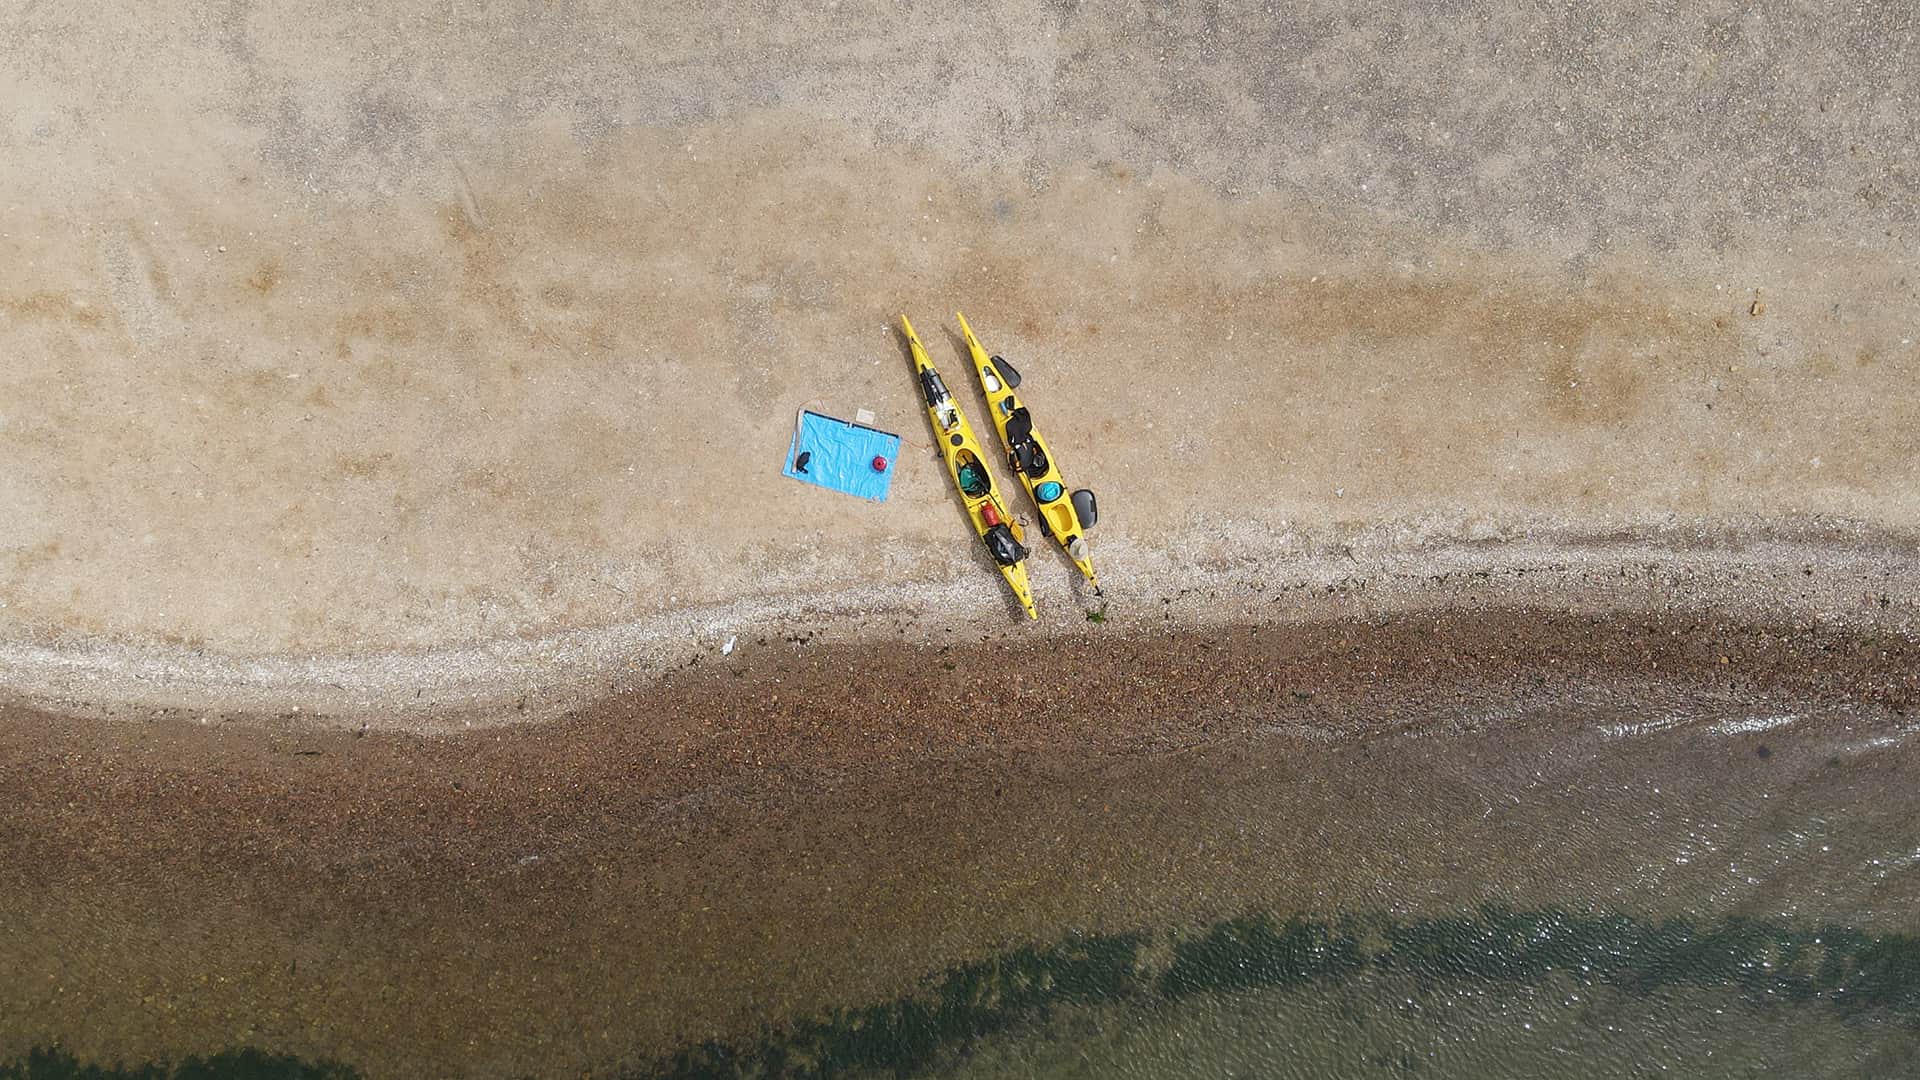 11two kayaks and equipment stationed on beach in Paracas